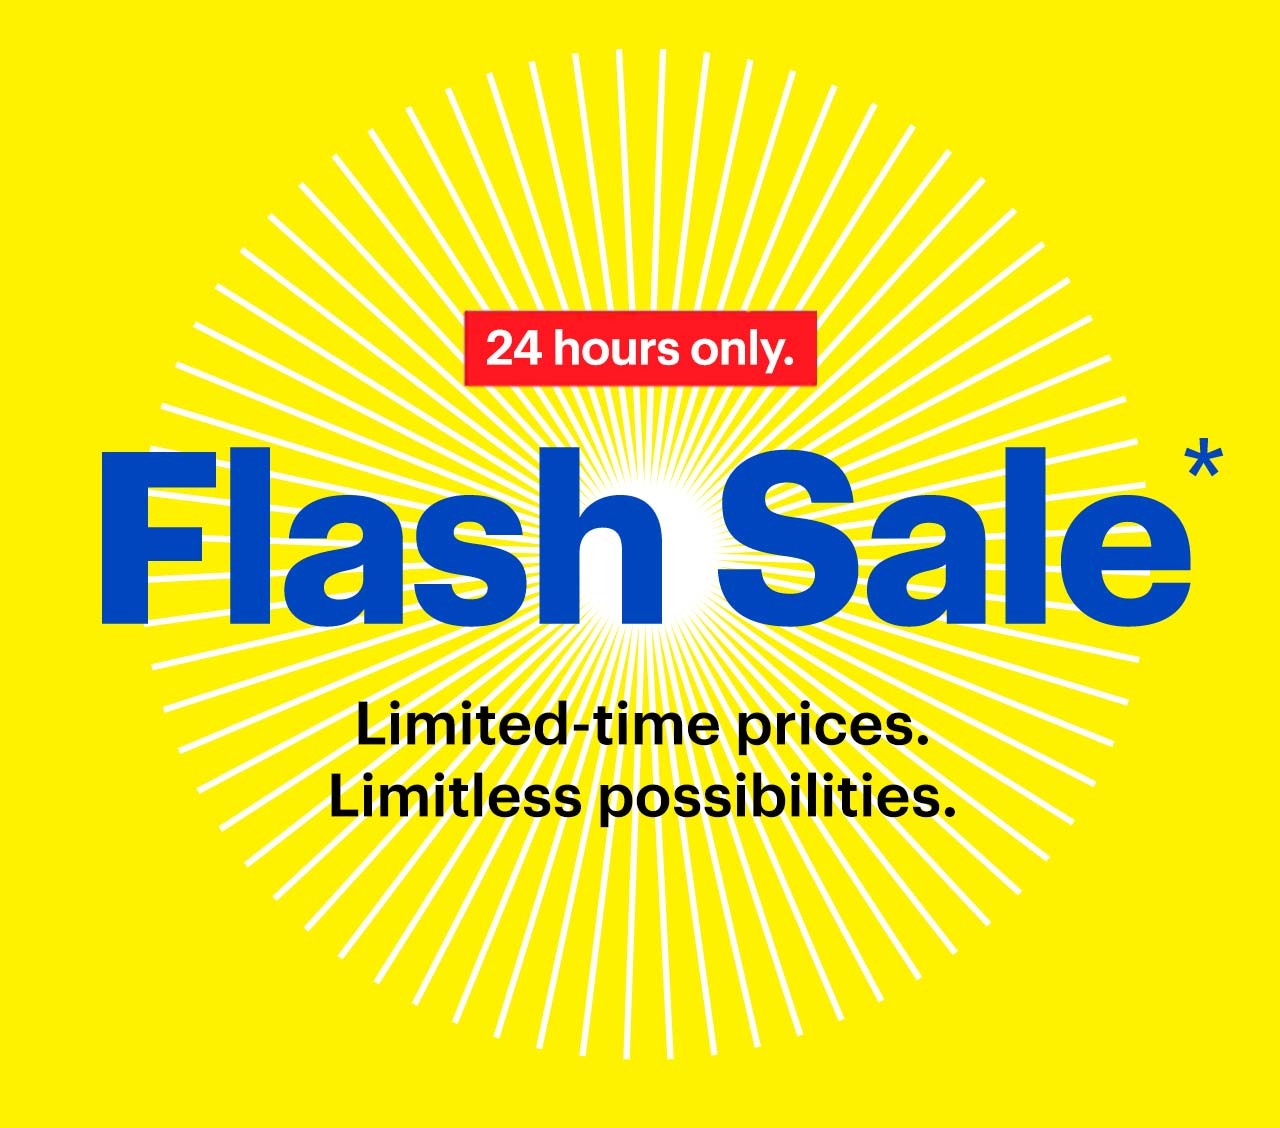 Flash Sale. 24 hours only. Limited-time prices. Limitless possibilities. Reference disclaimer.